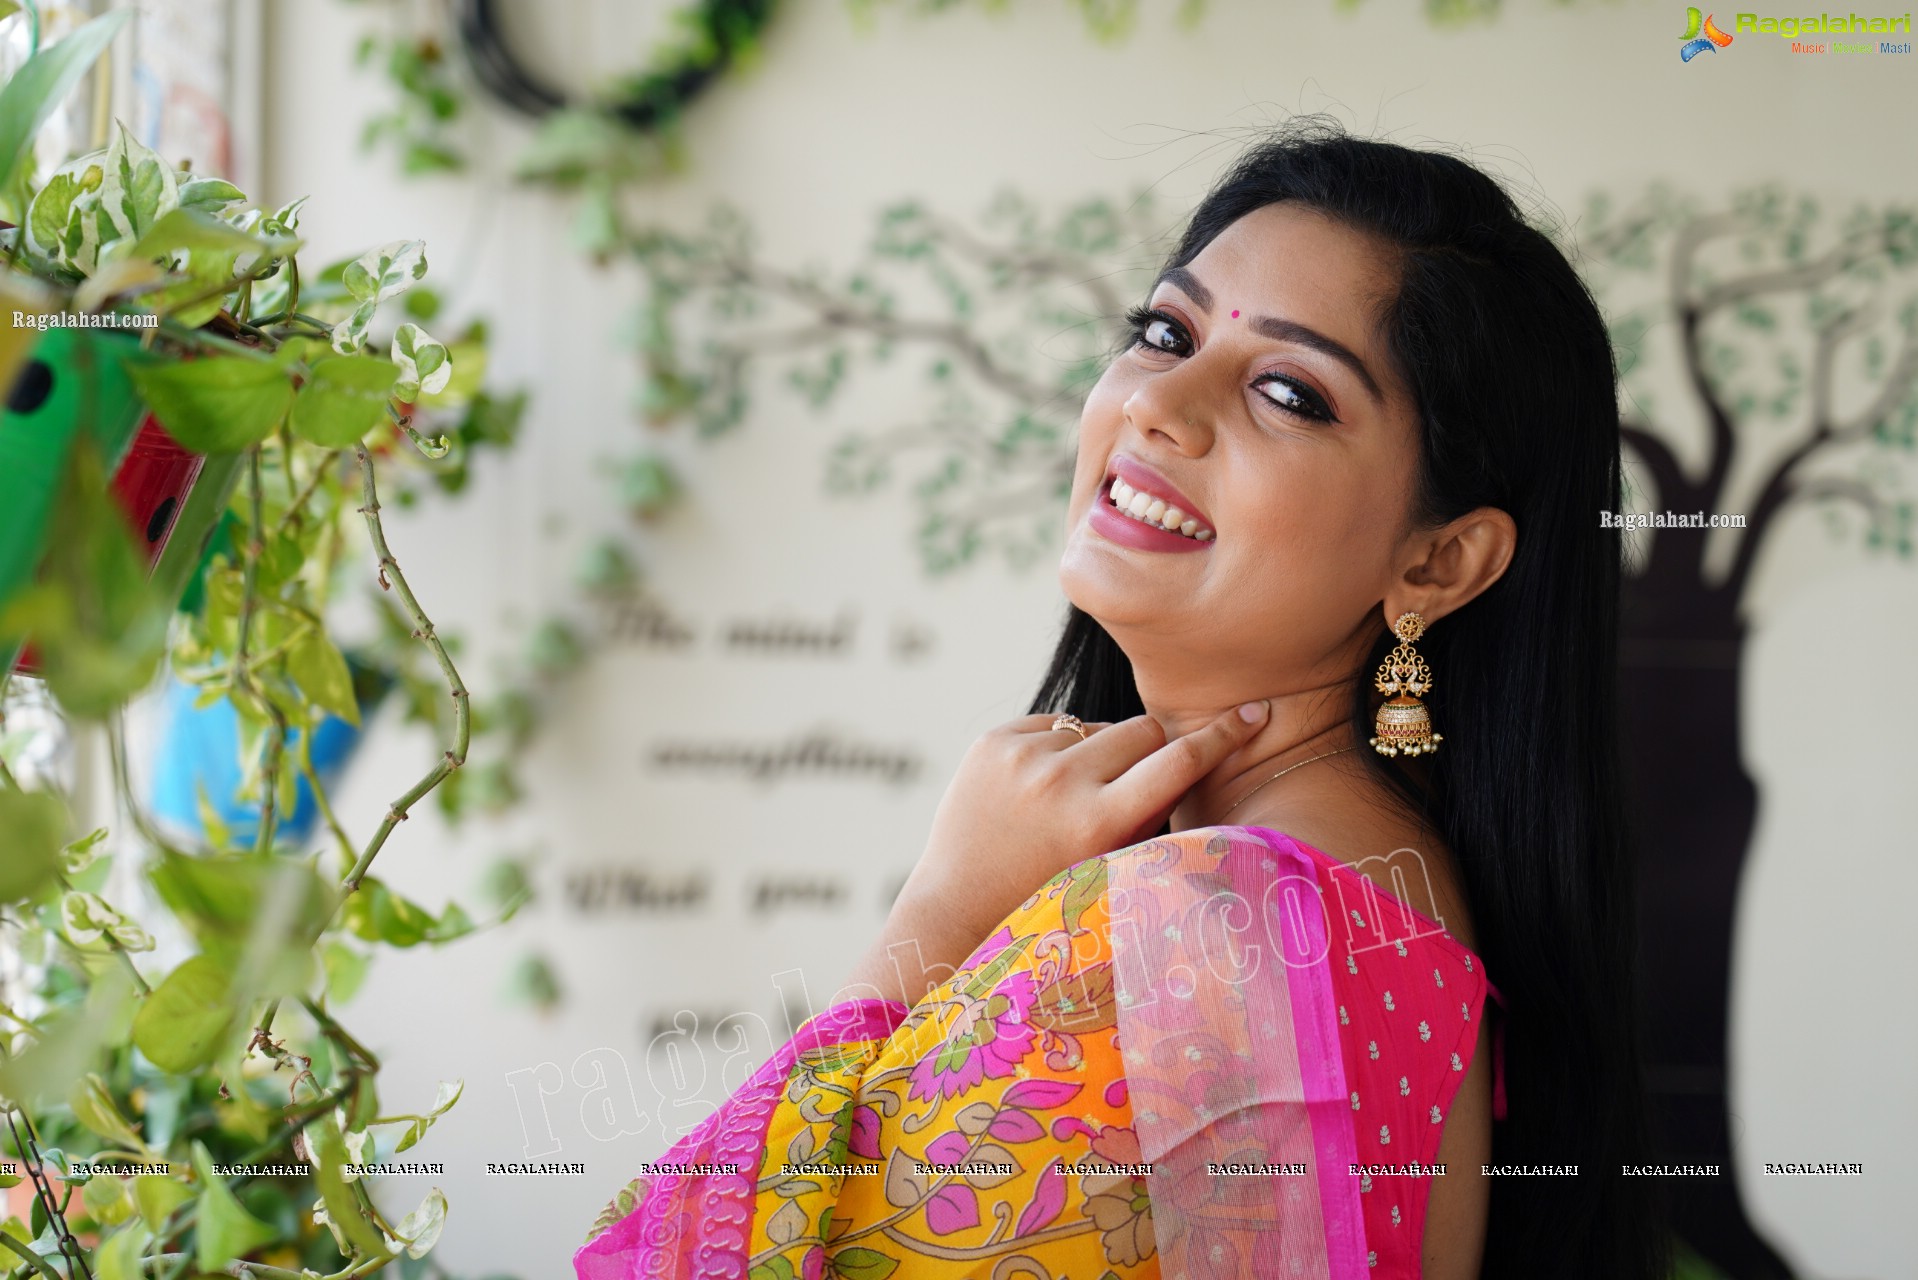 Aadhya Paruchuri in Yellow and Pink Floral Saree, Exclusive Photoshoot